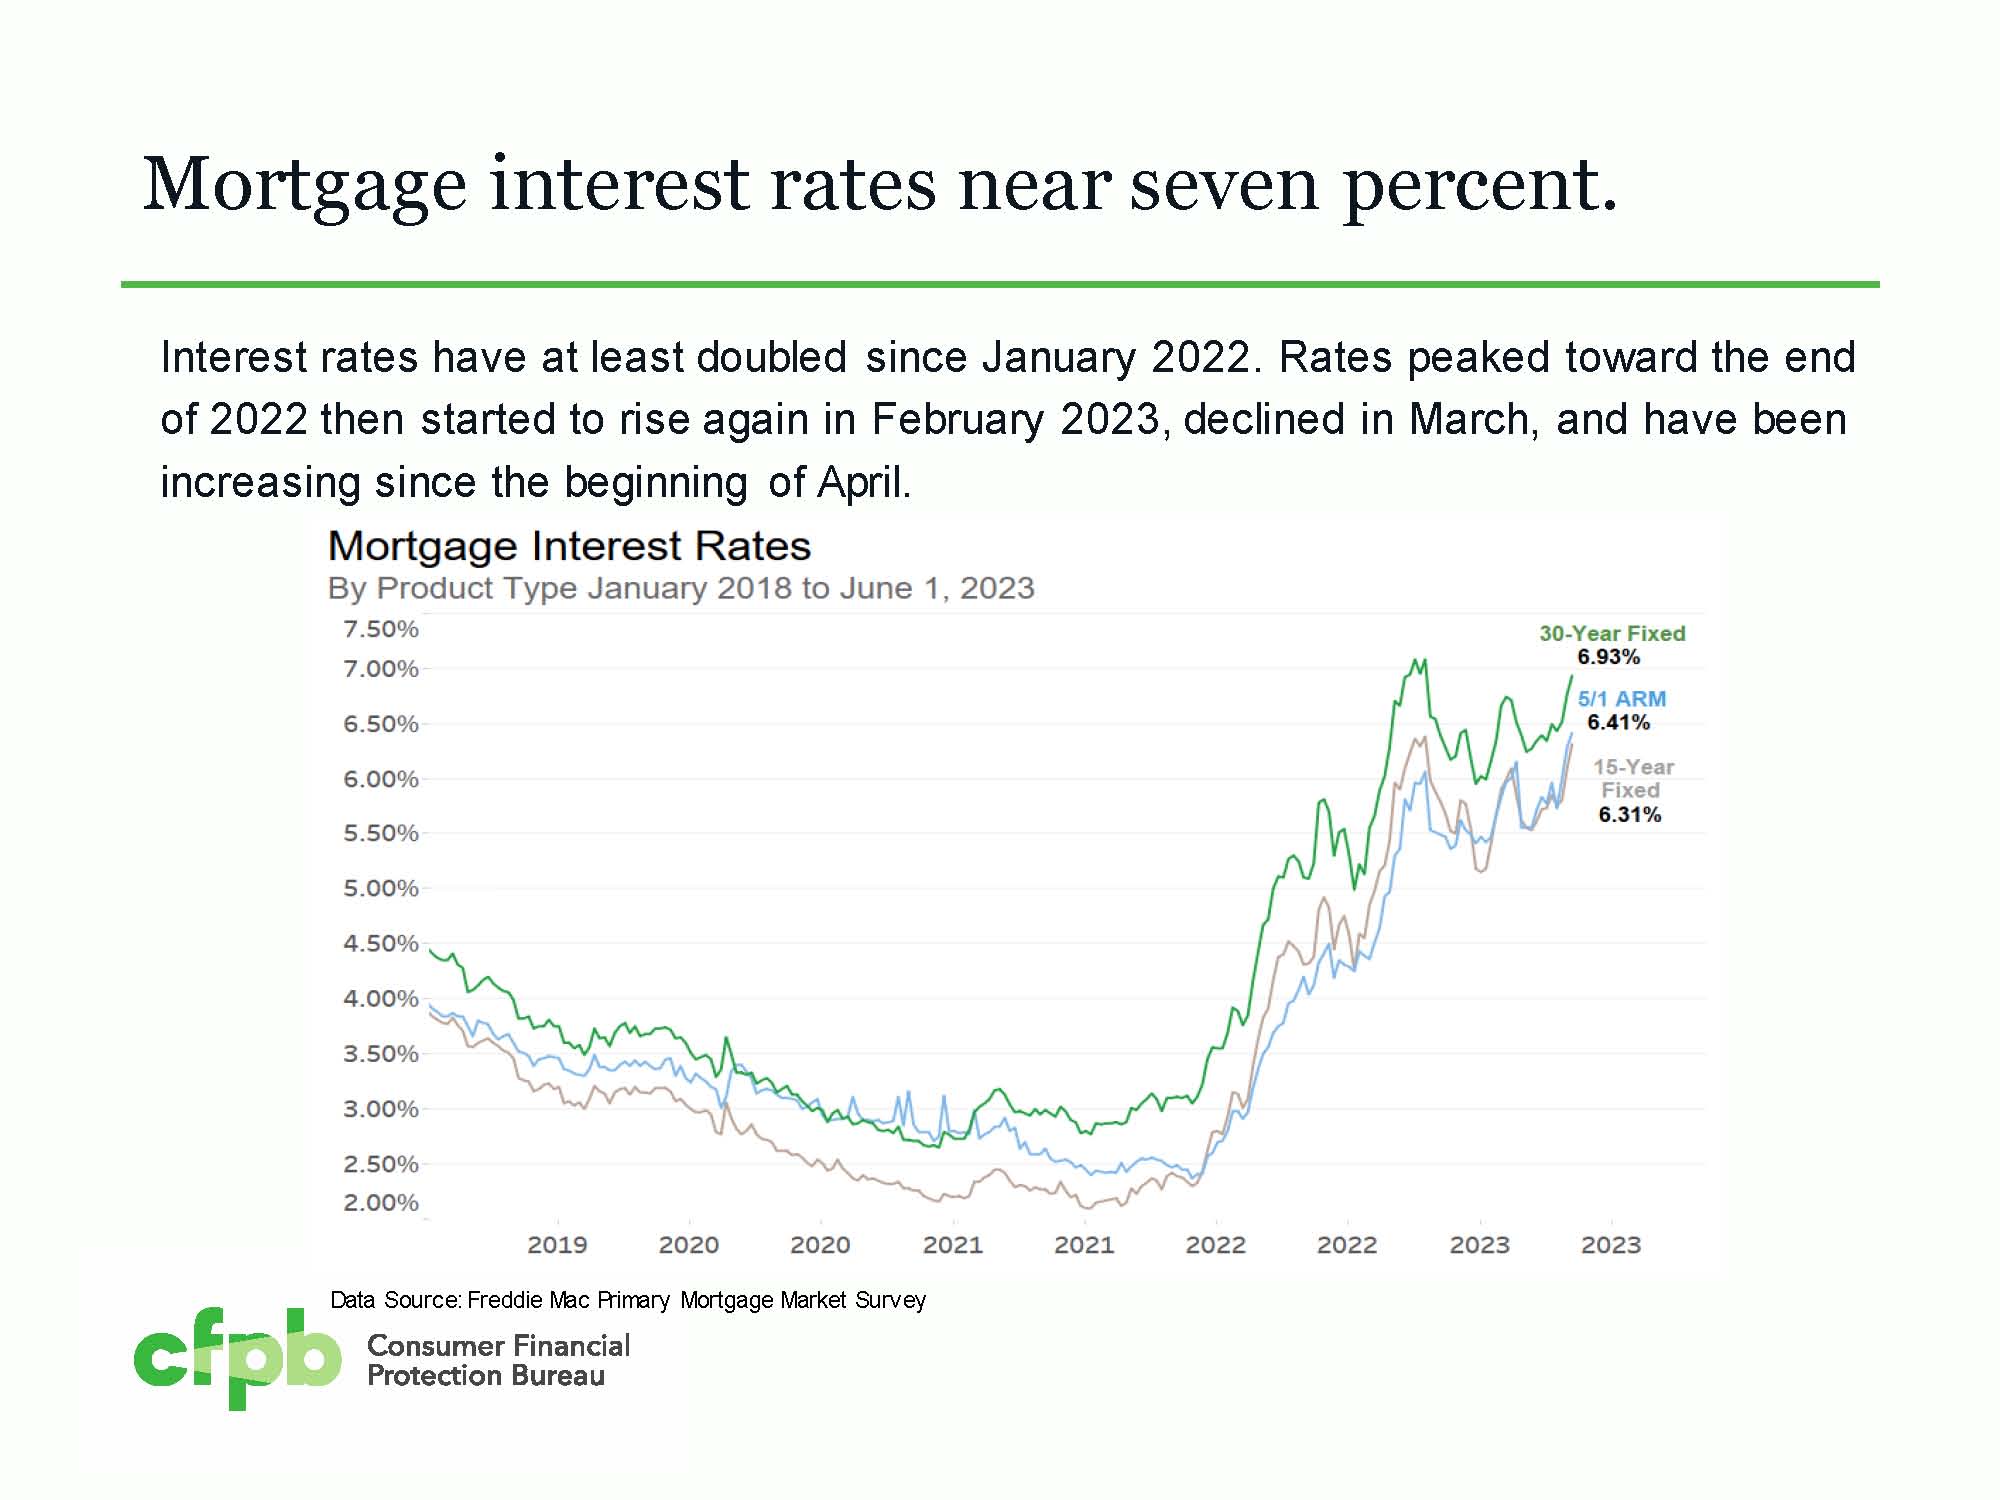 Mortgage interest rates in recent years